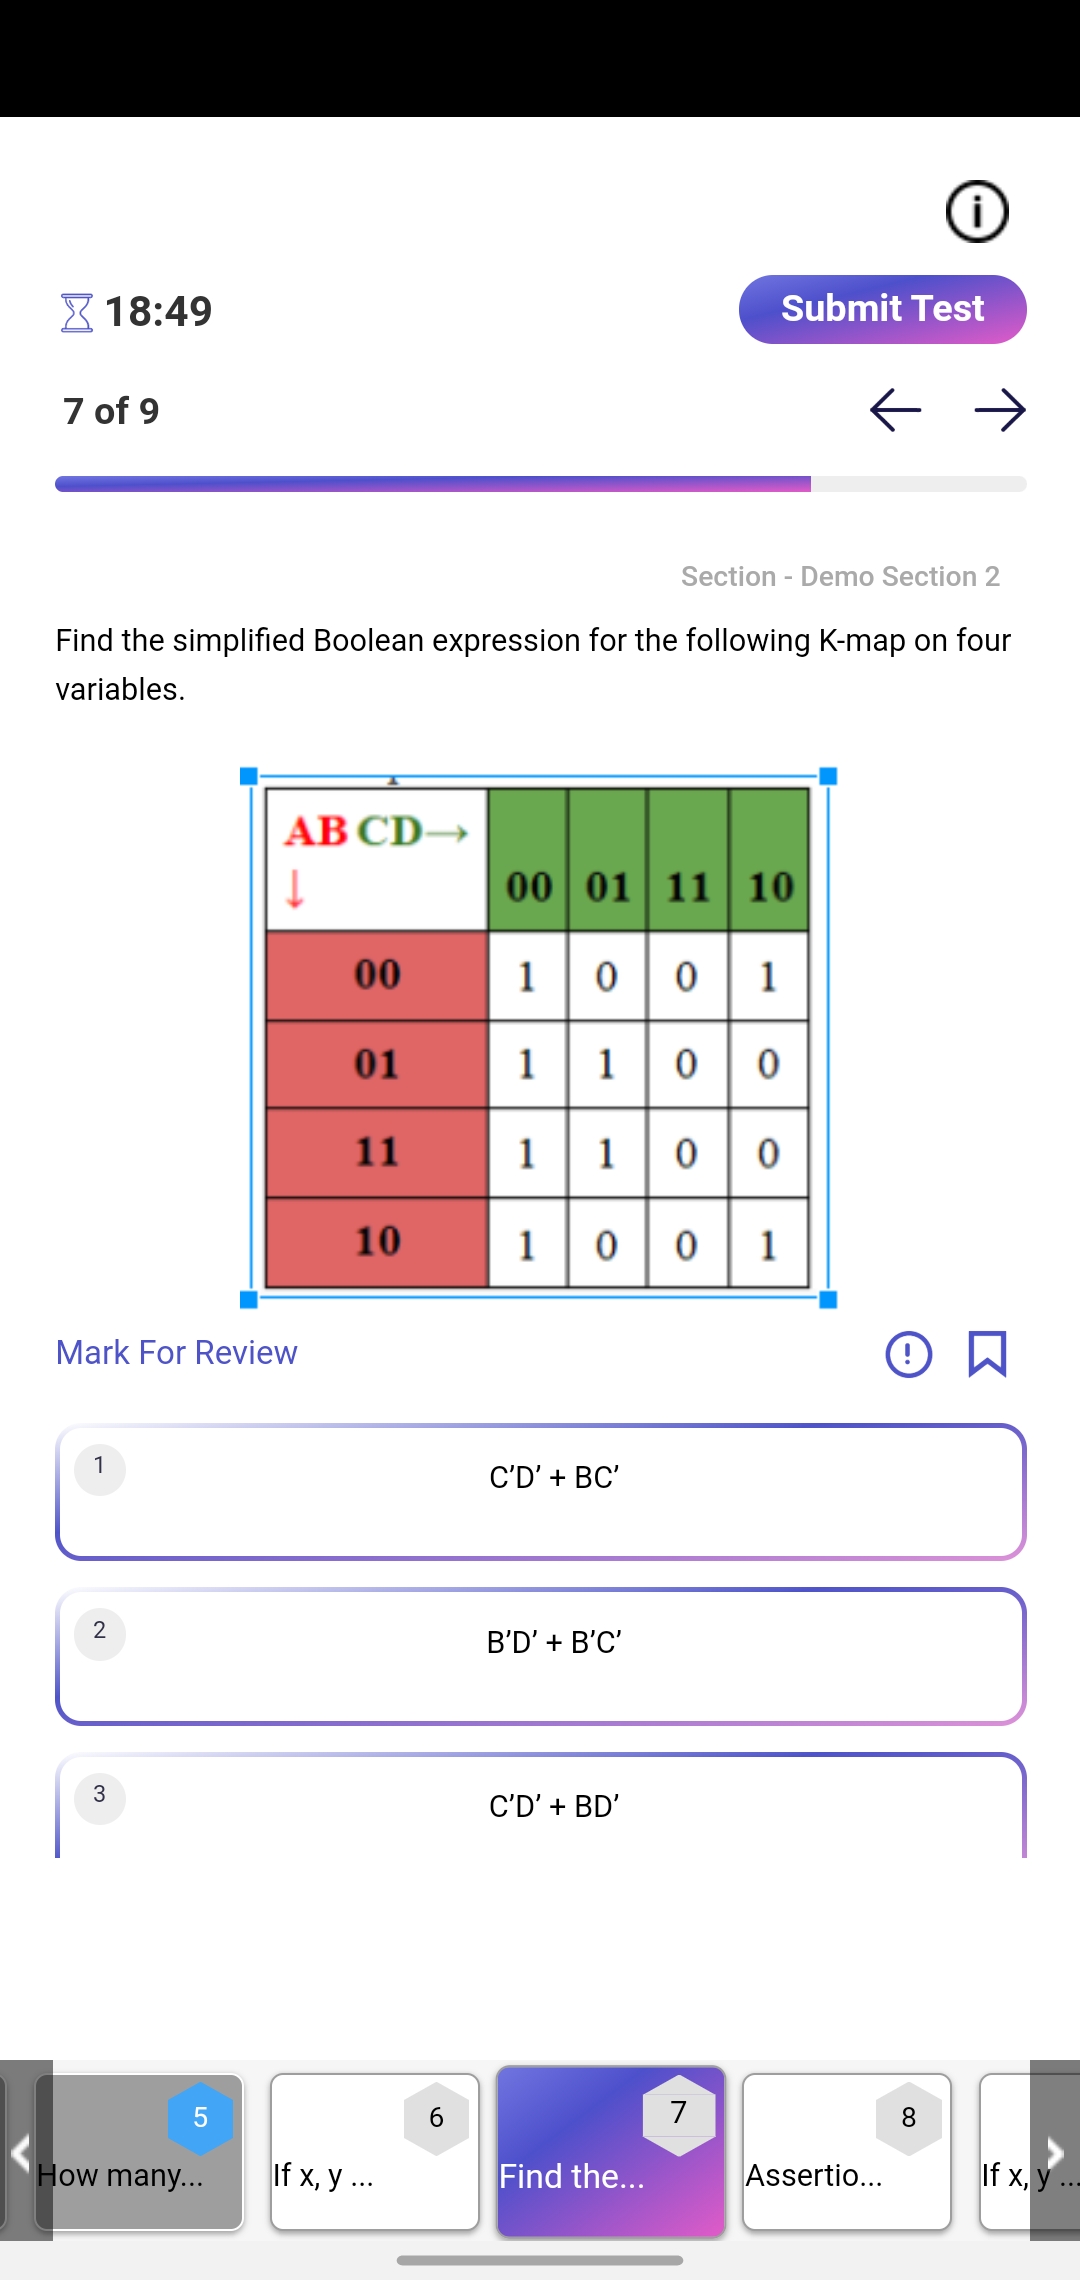 6. You can differentiate questions by the color given to the questions in the question panel.  Ex: In the image below, the 5th question is in one section and 6,7,8 are in another section. You can also see the section question belongs to in the top right. 